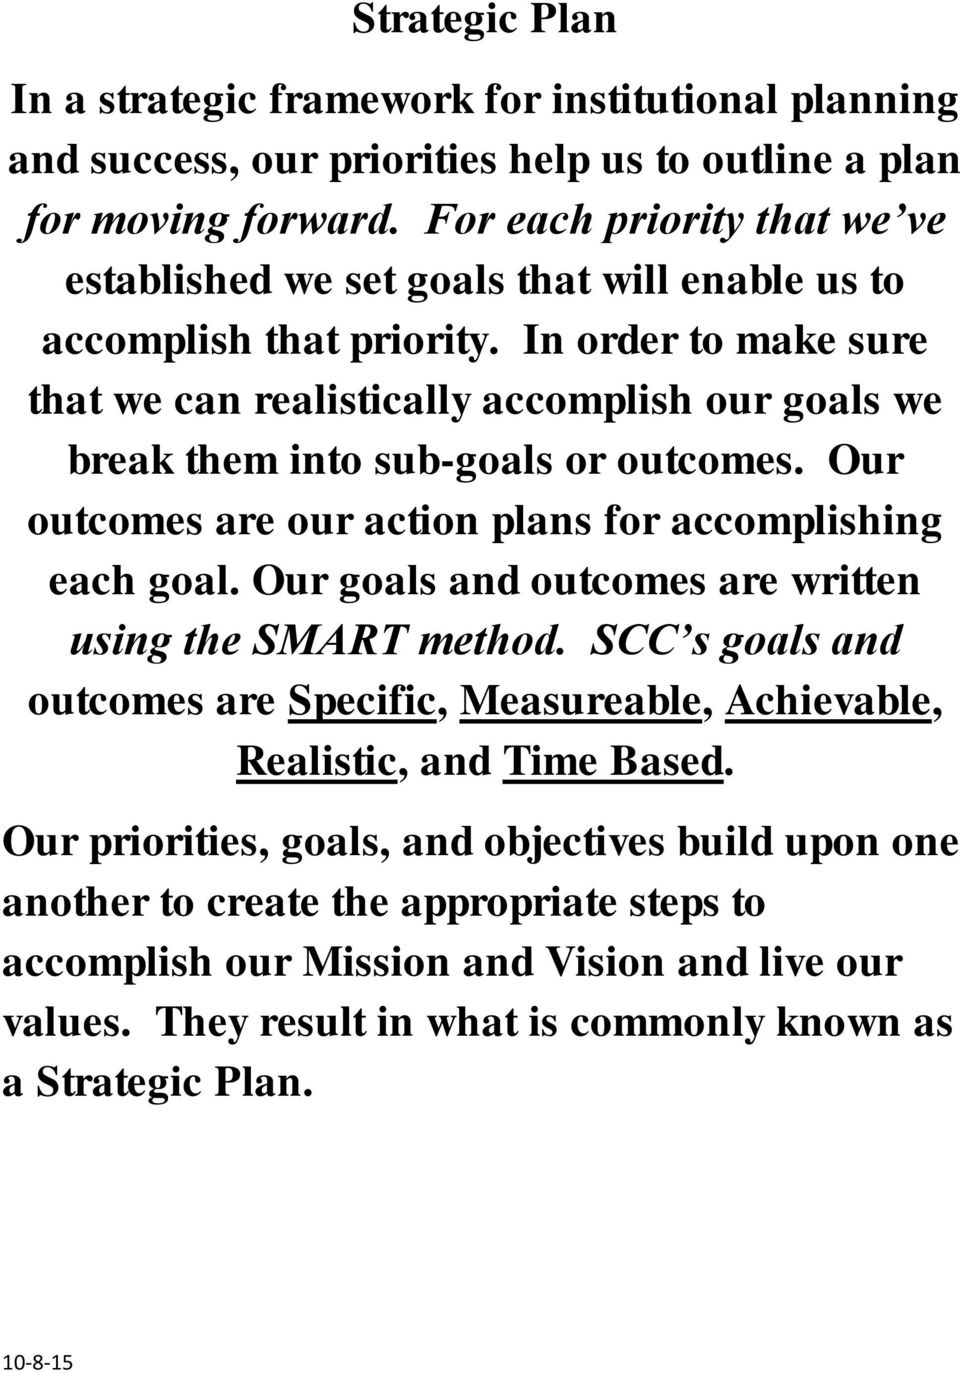 In order to make sure that we can realistically accomplish our goals we break them into sub-goals or outcomes. Our outcomes are our action plans for accomplishing each goal.